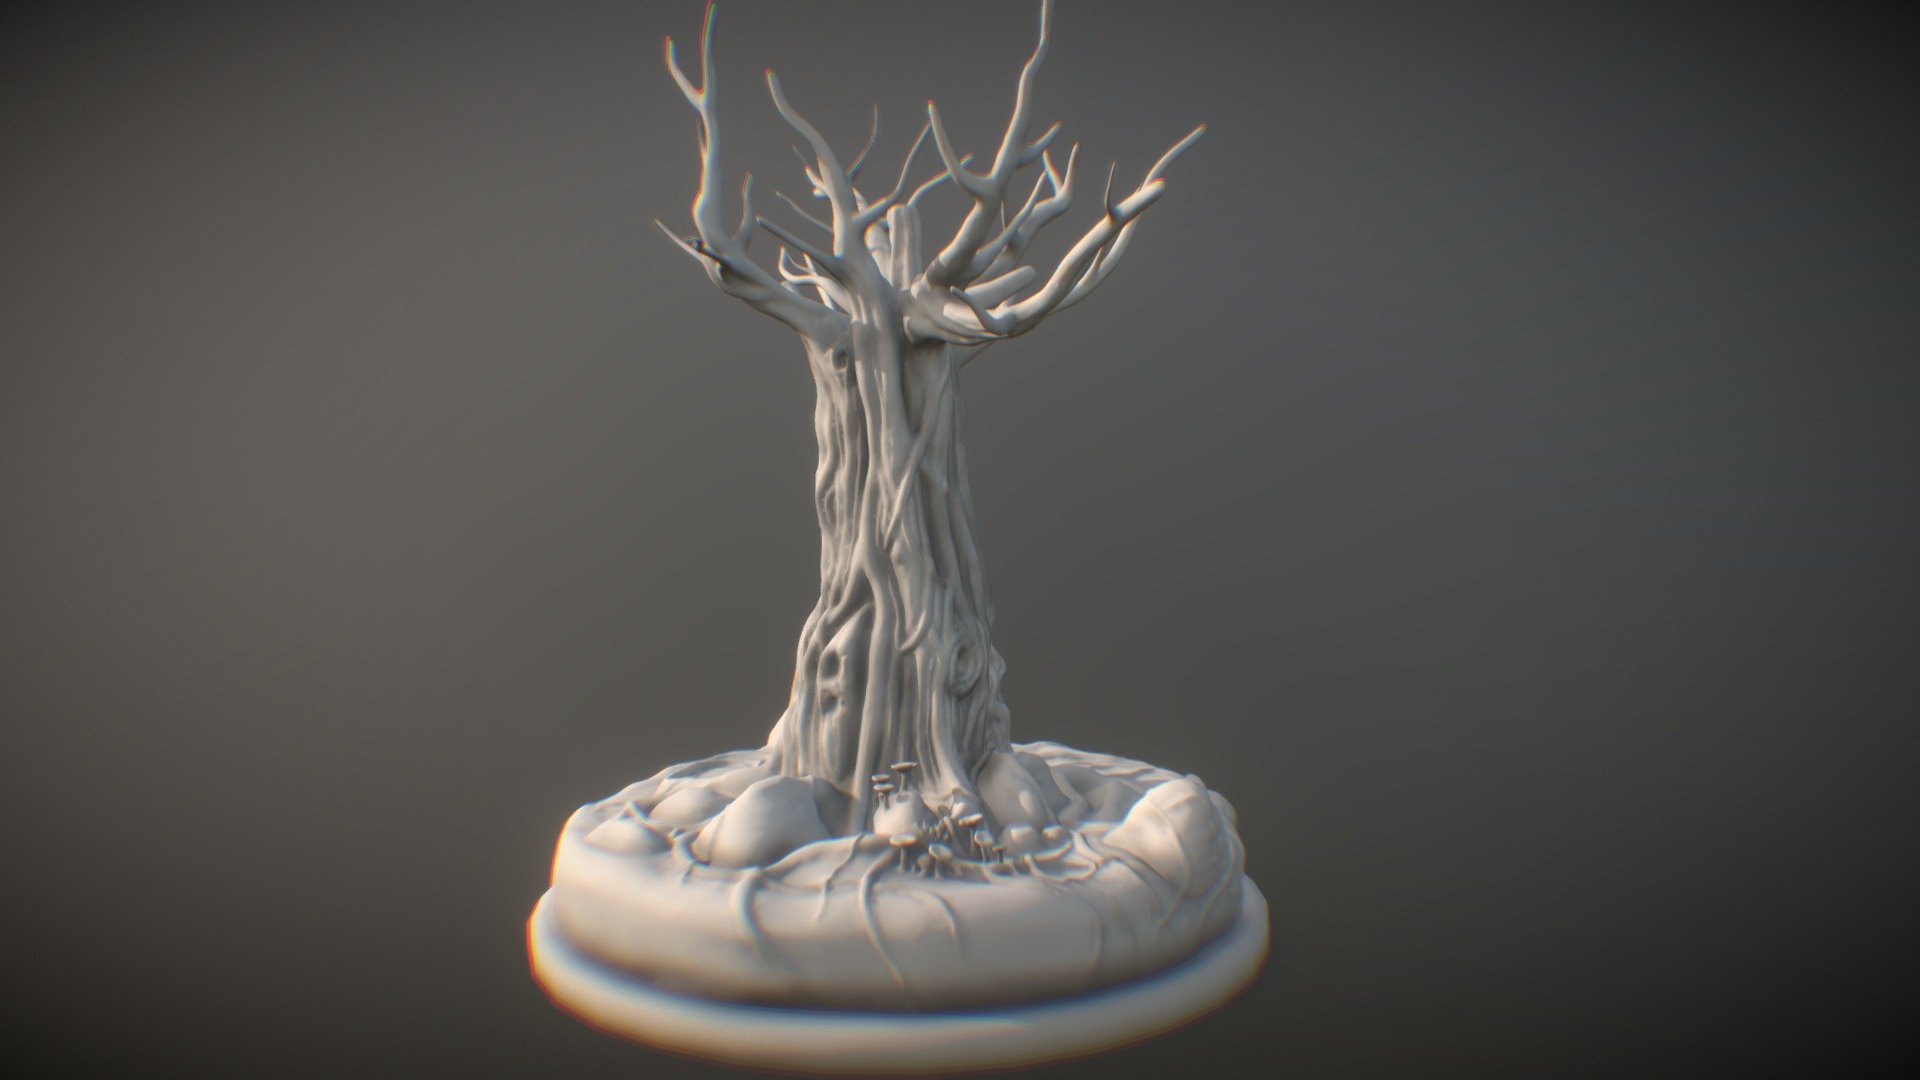 hi, I made this model for 3D printing, you can download it and quietly convert it to stl and print

(if you buy 50 dollars worth of 3d models, i will send you 2 models of your choice for free) - Very Old Tree (free) - Buy Royalty Free 3D model by carlcapu9 3d model